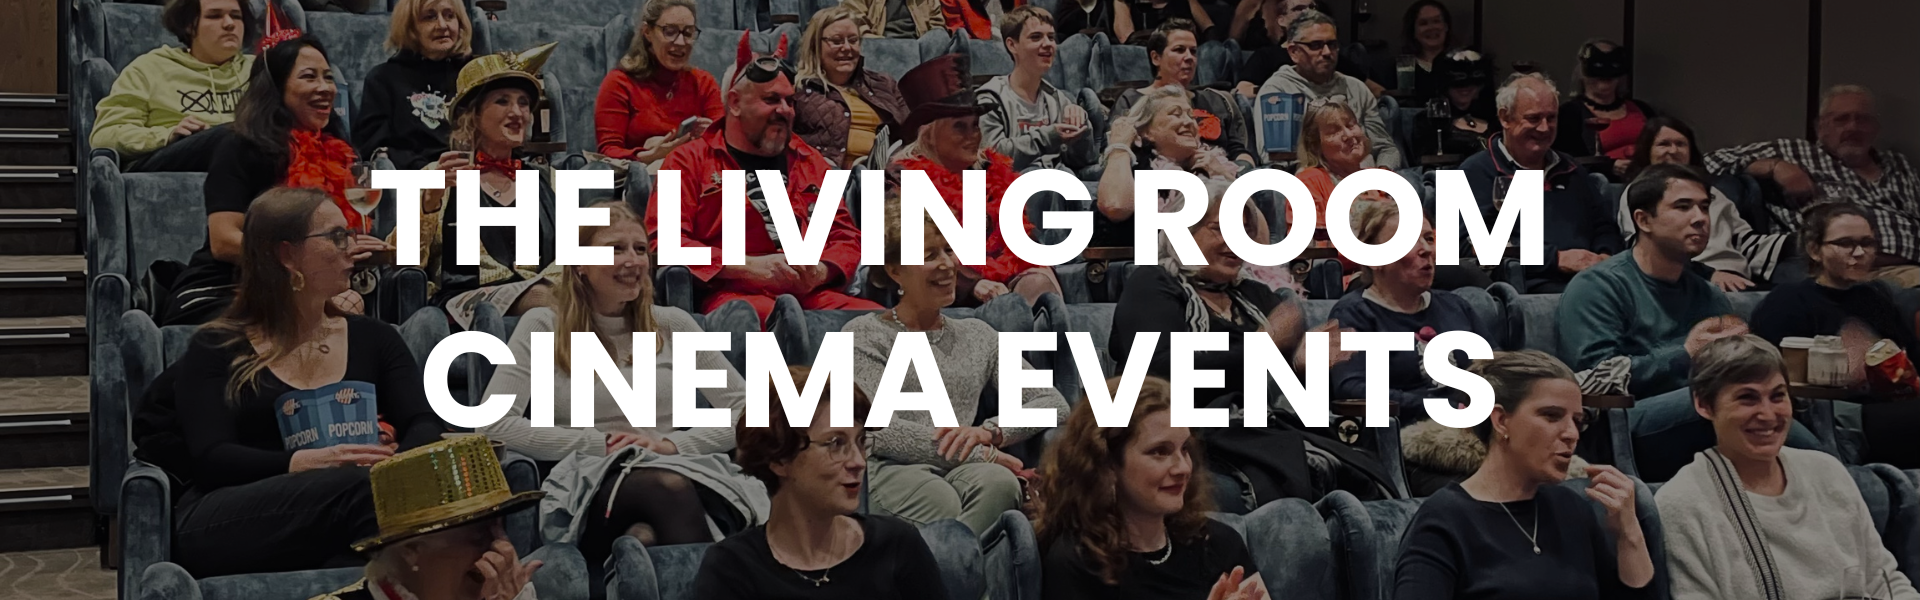 The Living Room Cinema Events